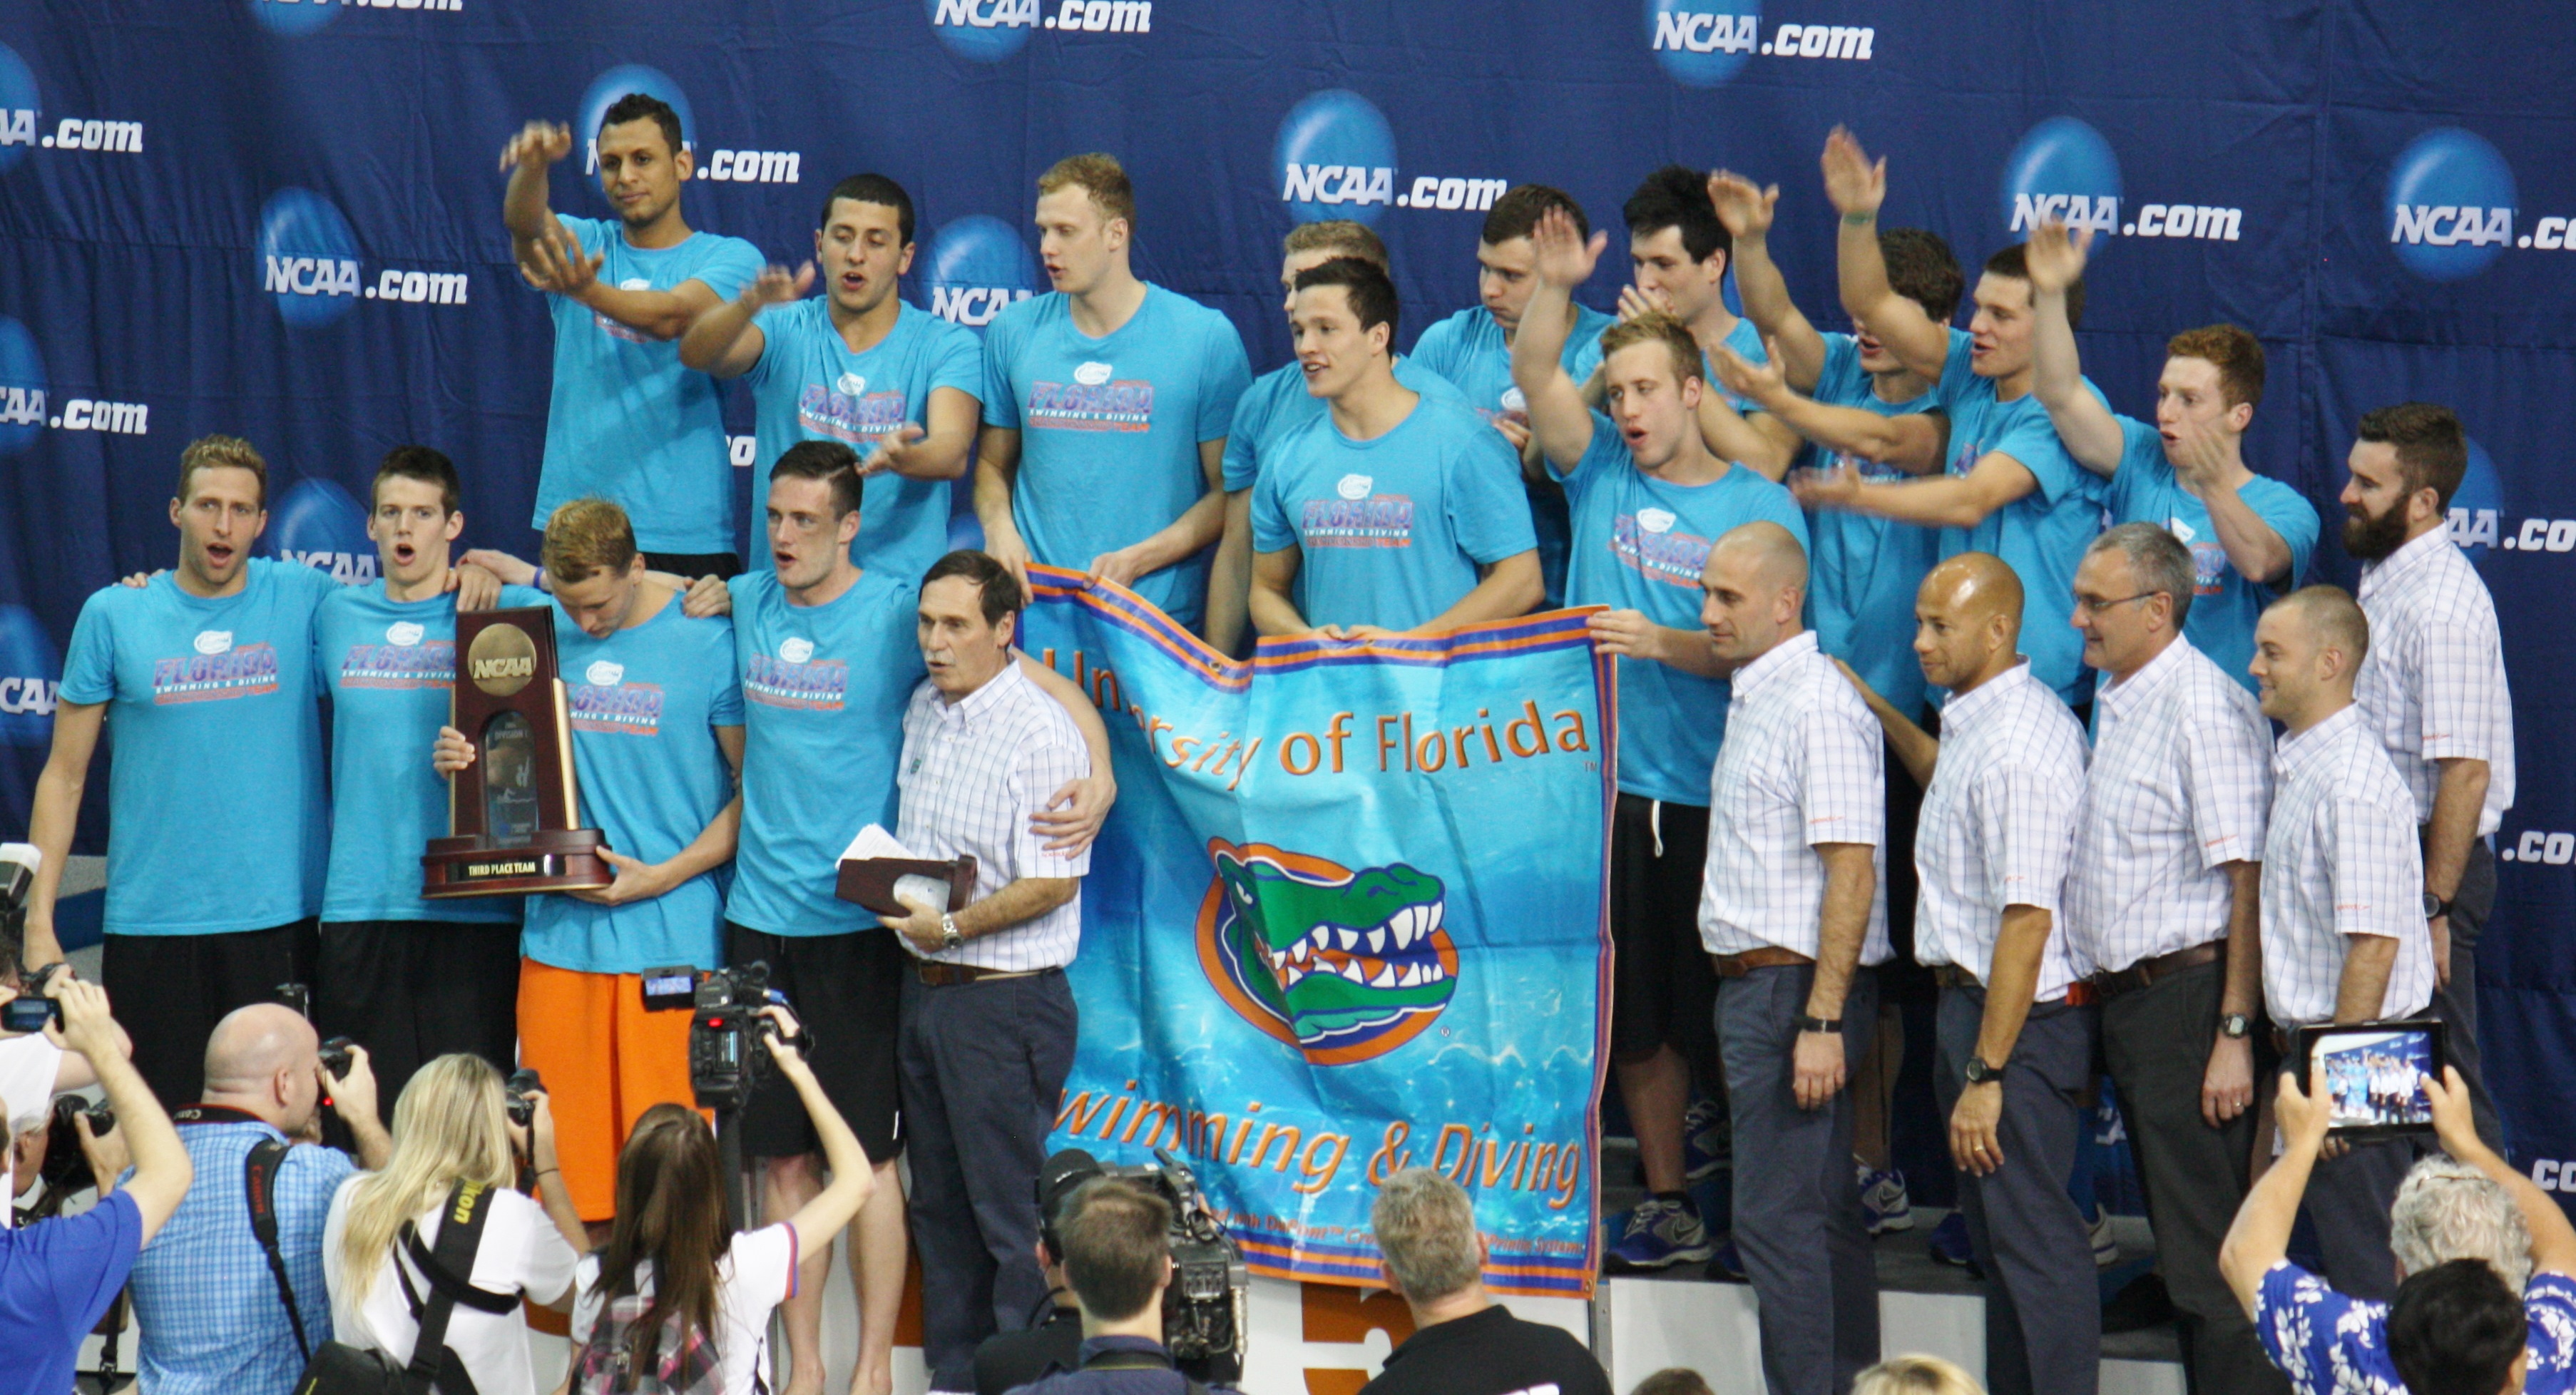 My First NCAA Championships with the Gators